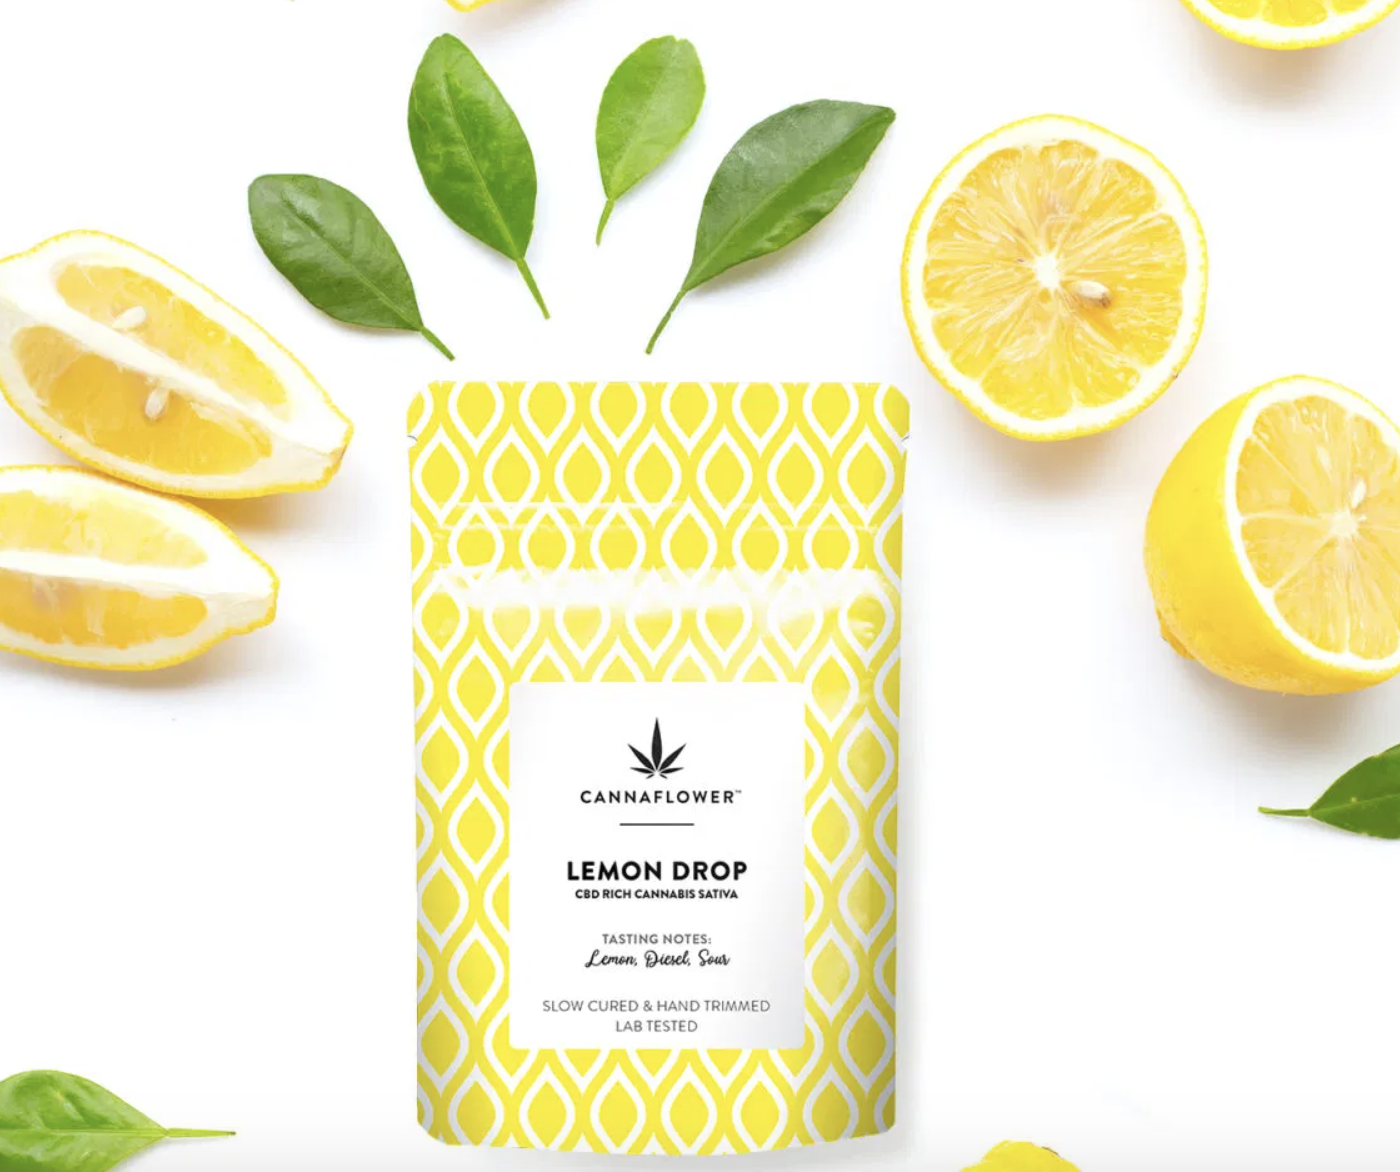 Lemon drop strain of CBD flower in its fresh lock pouch surrounded by lemon slices and leaves.